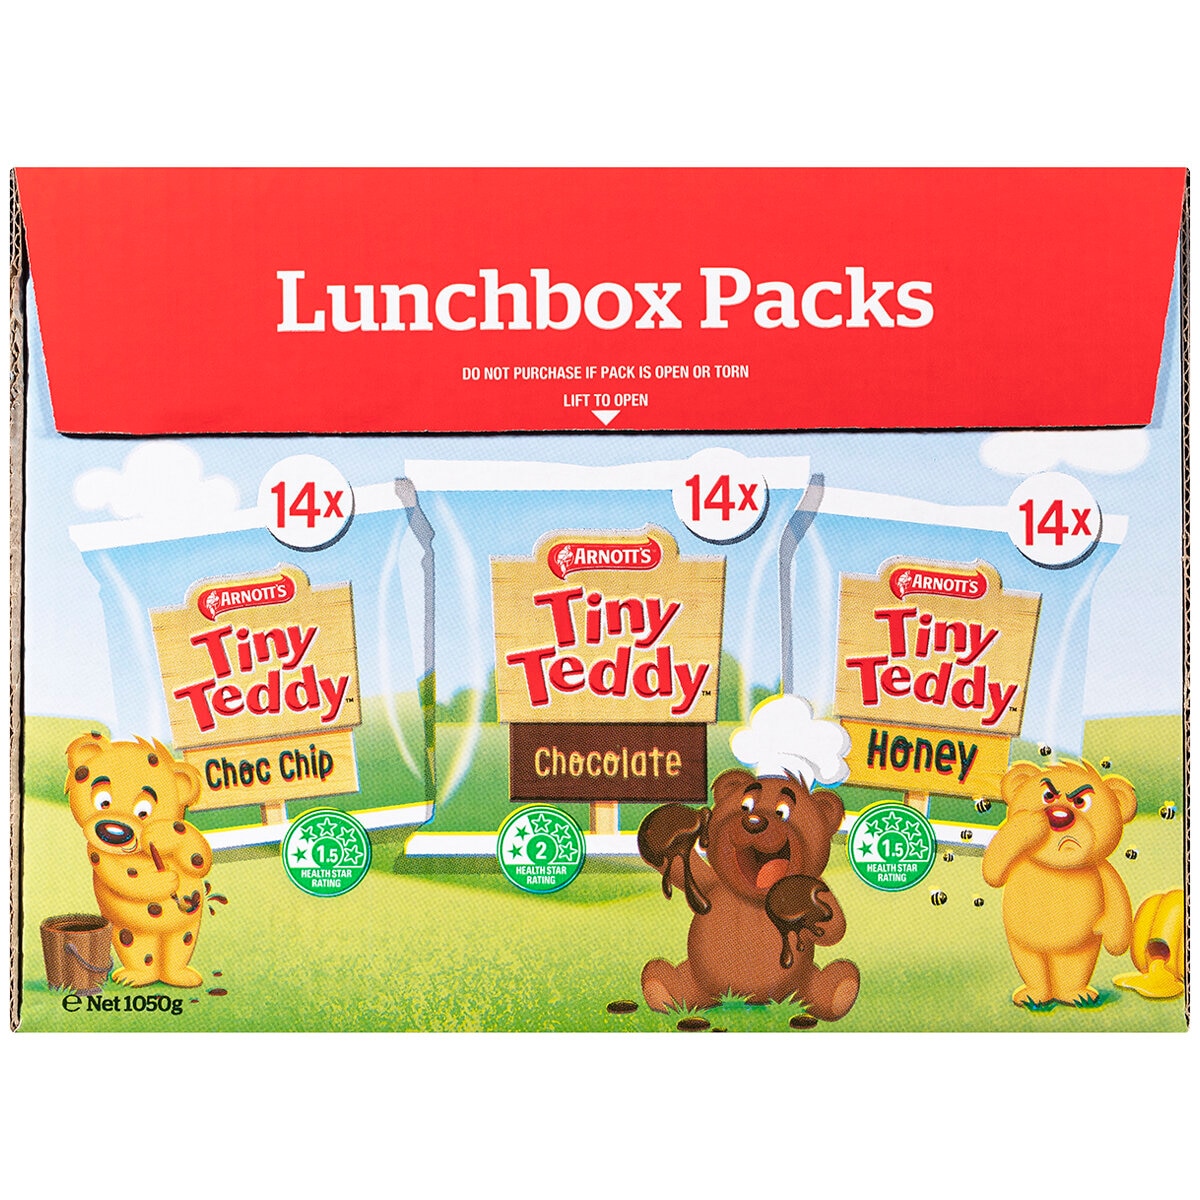 Arnott's Multipack Tiny Teddy, Shapes or Bluey Biscuits 150g-200g